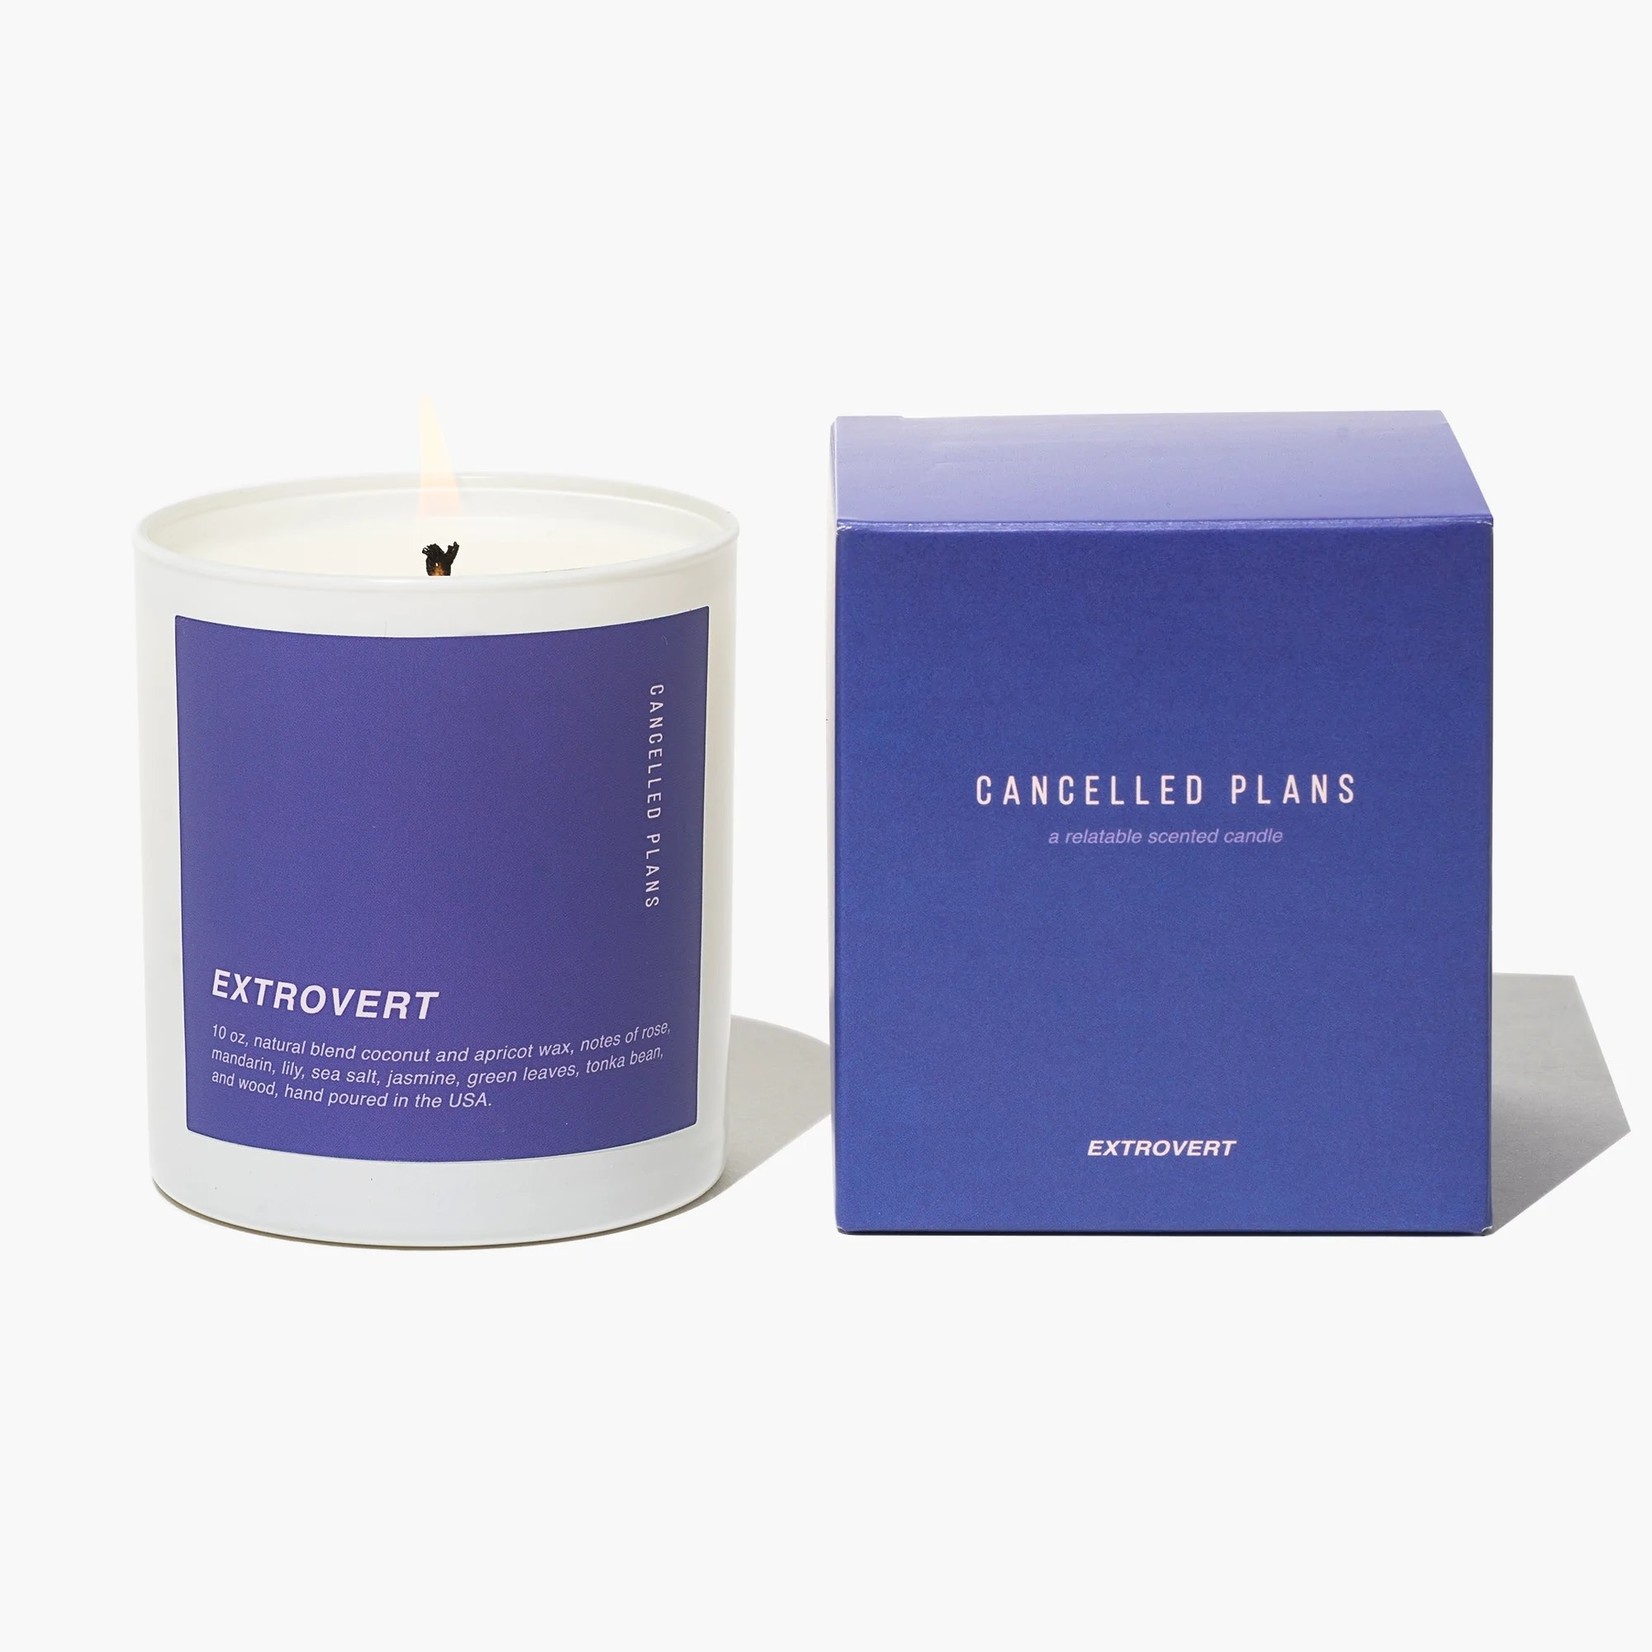 Cancelled Plans Extrovert 10oz. Coconut Wax Candle